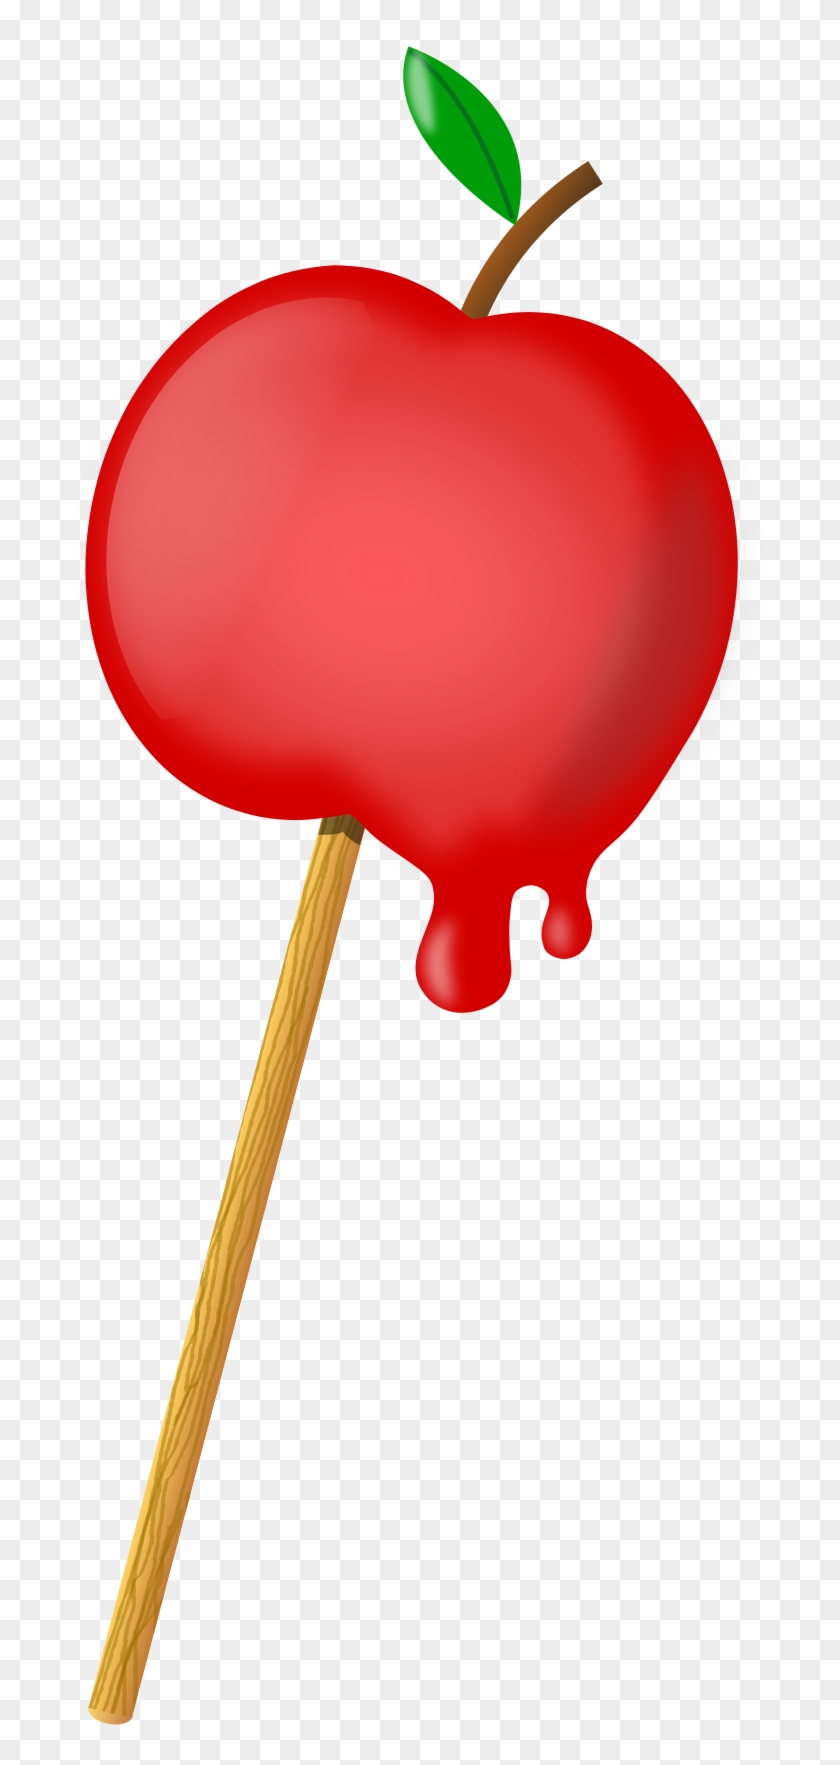 Coated Apple - Candy Apple Clipart #736353